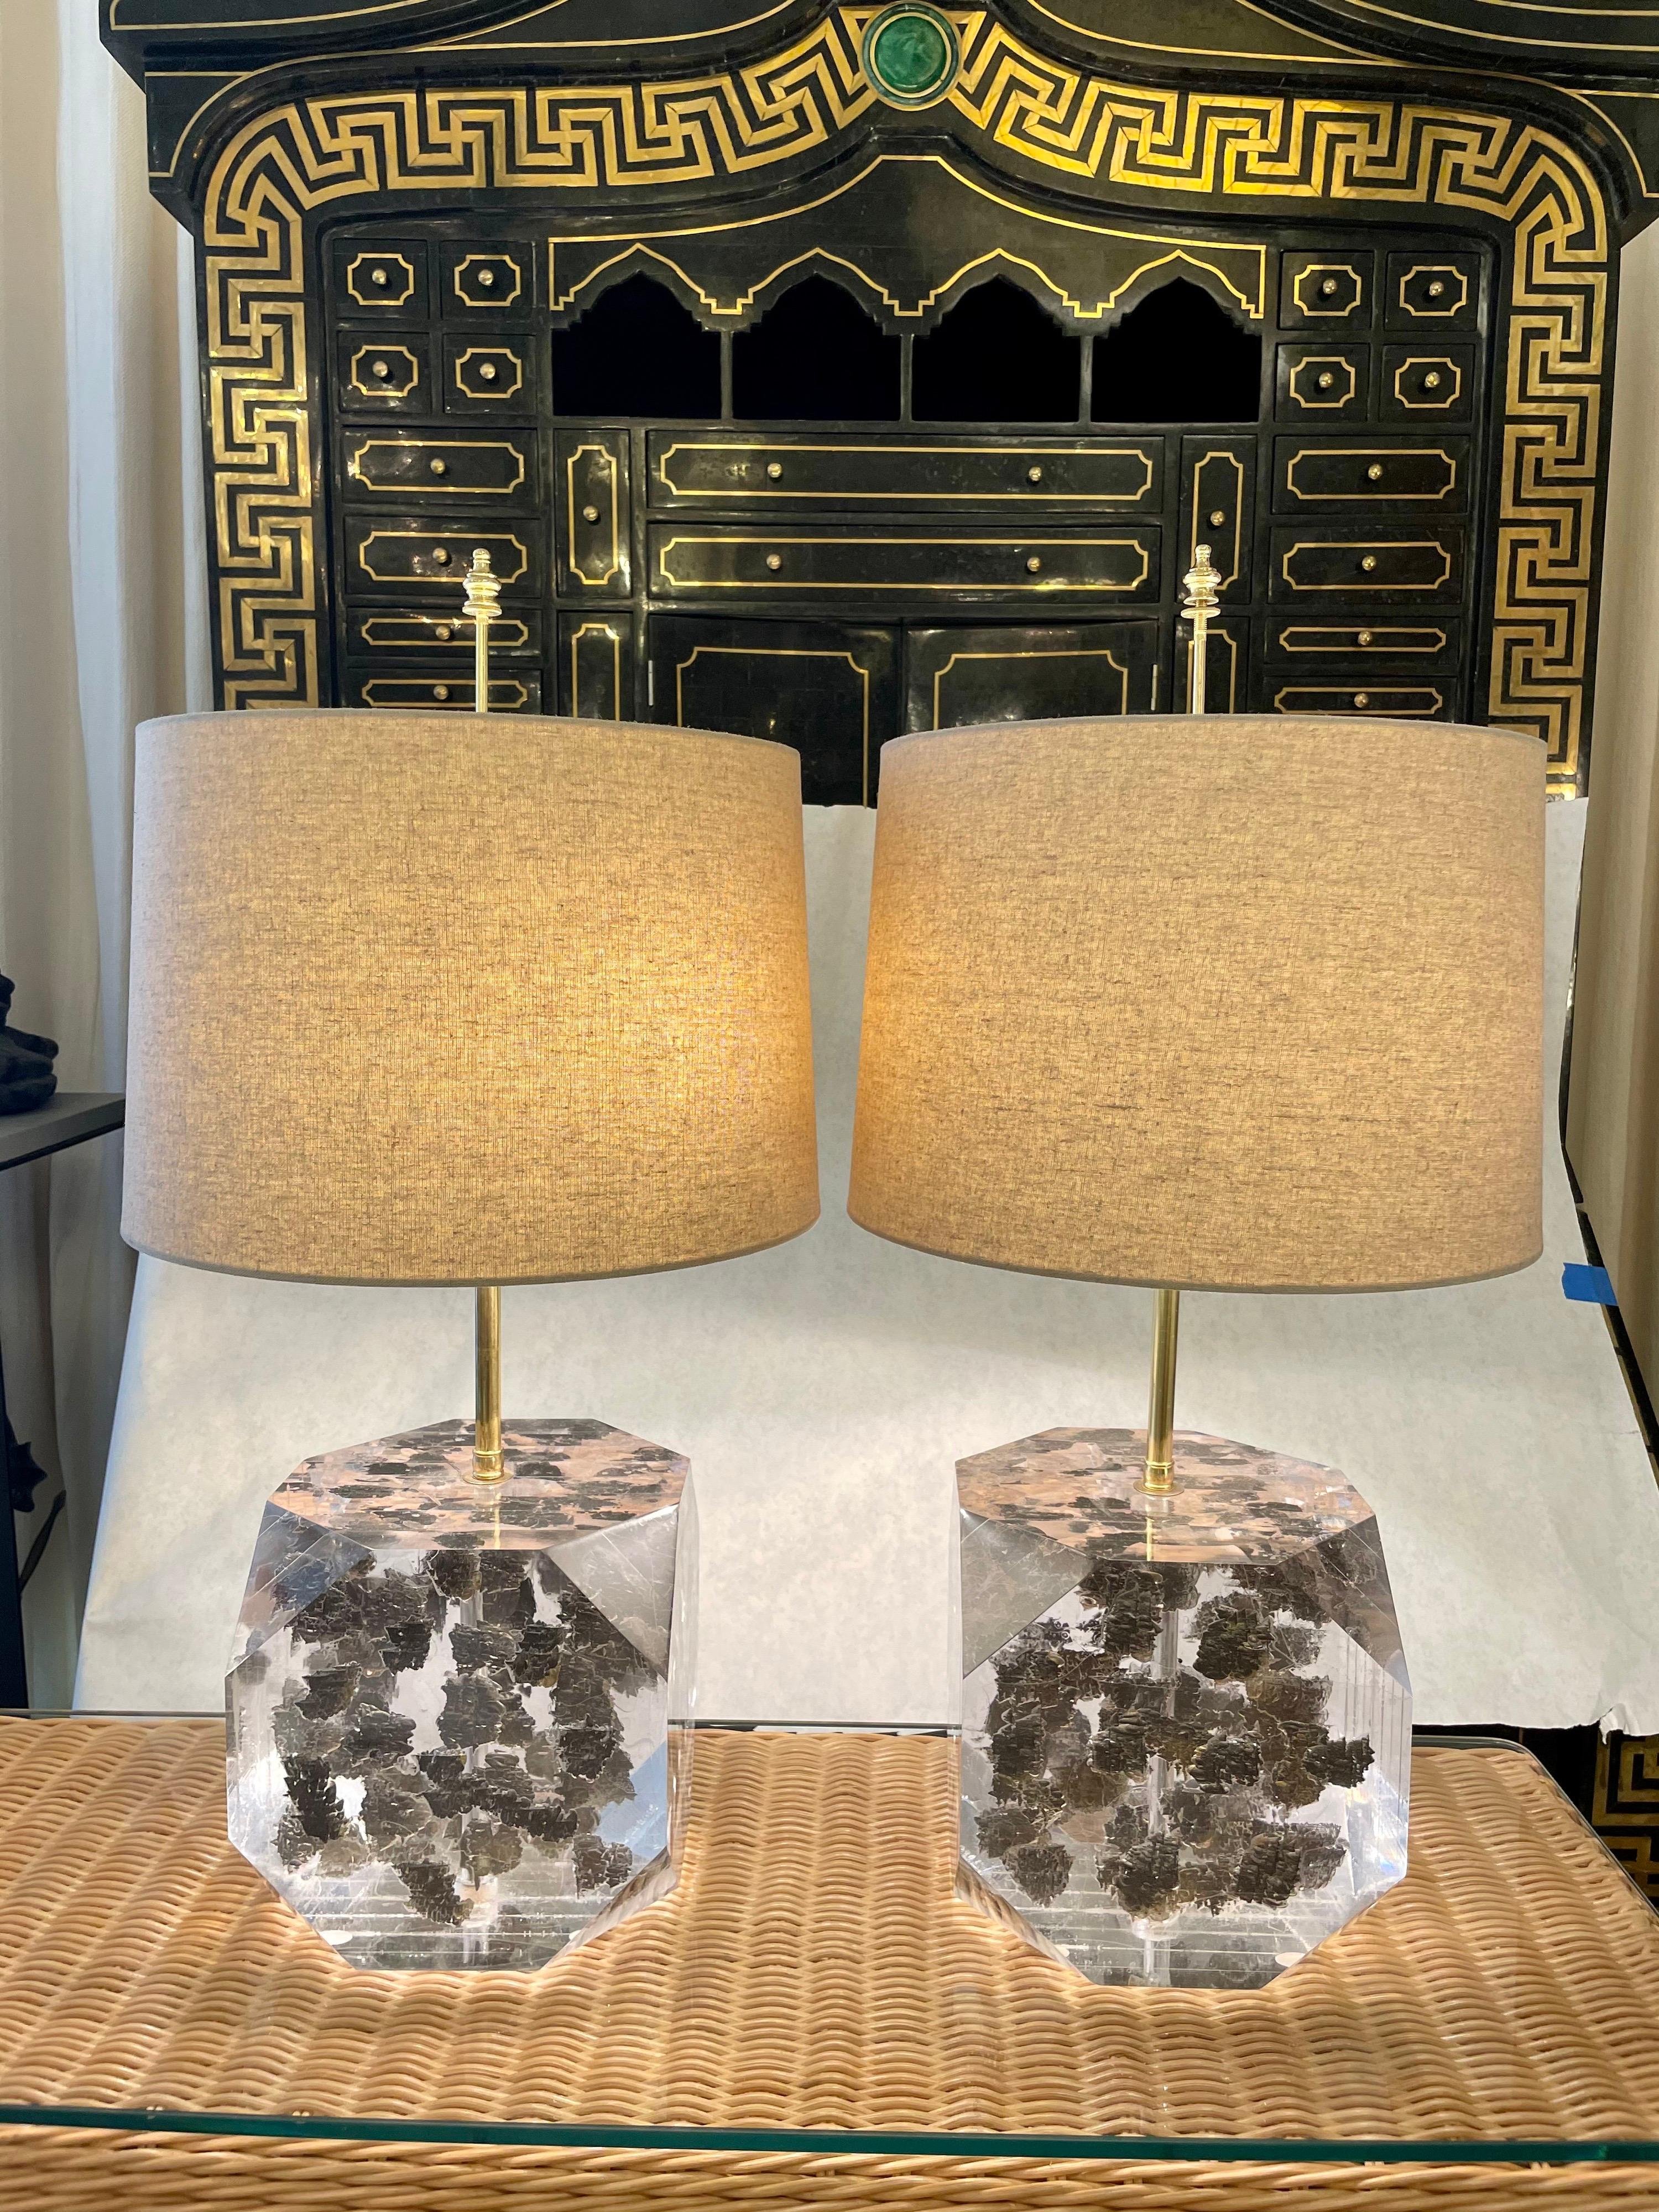 Lucite Layered Hexagonal Block Lamps, Pair by Freda Koblick For Sale 1